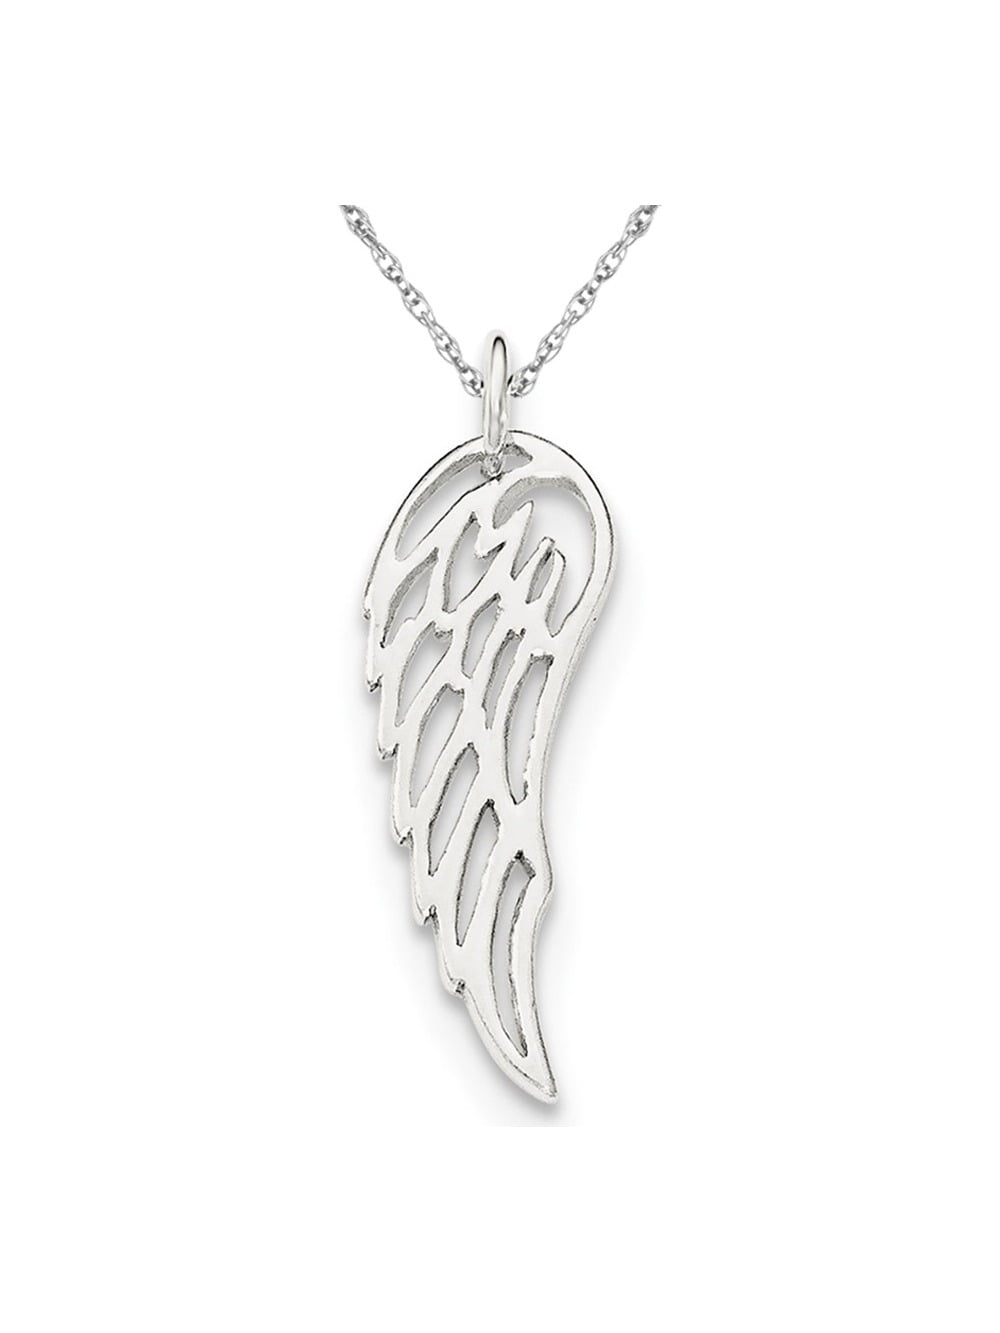 Uplifting Believe and Angel Wing .925 Sterling Silver Pendant Necklace